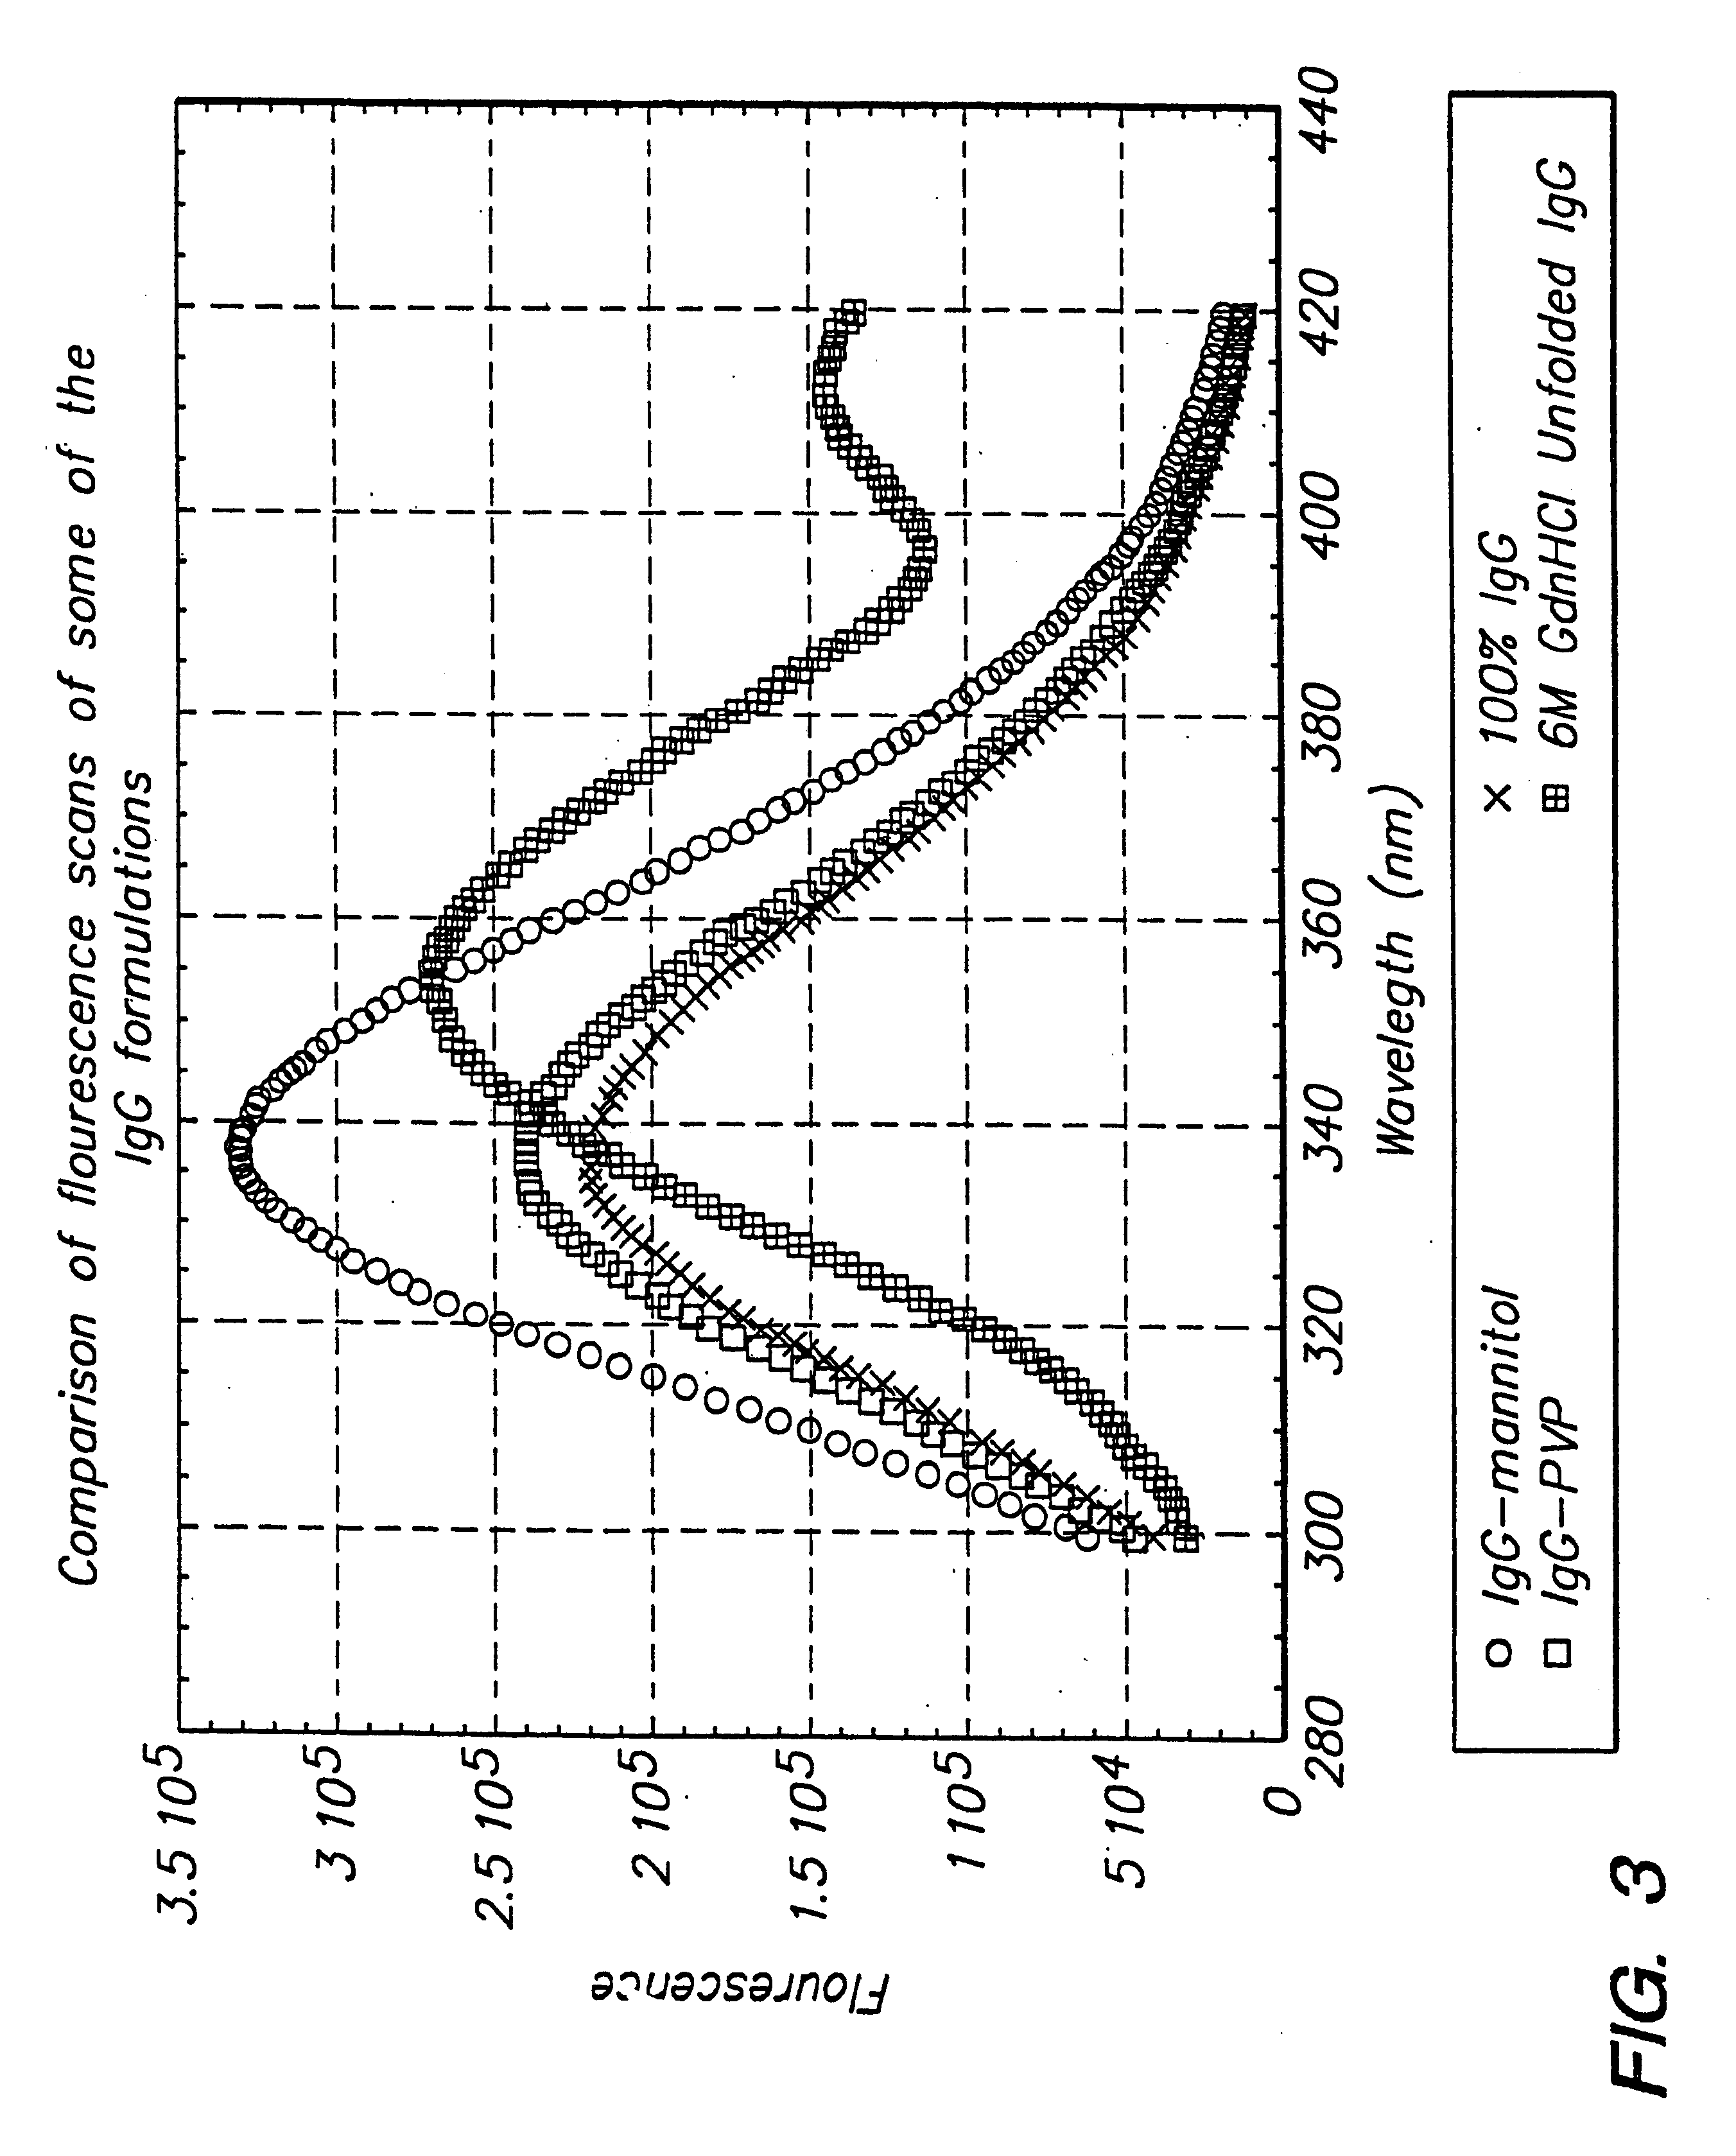 Dispersible antibody compositions and methods for their preparation and use